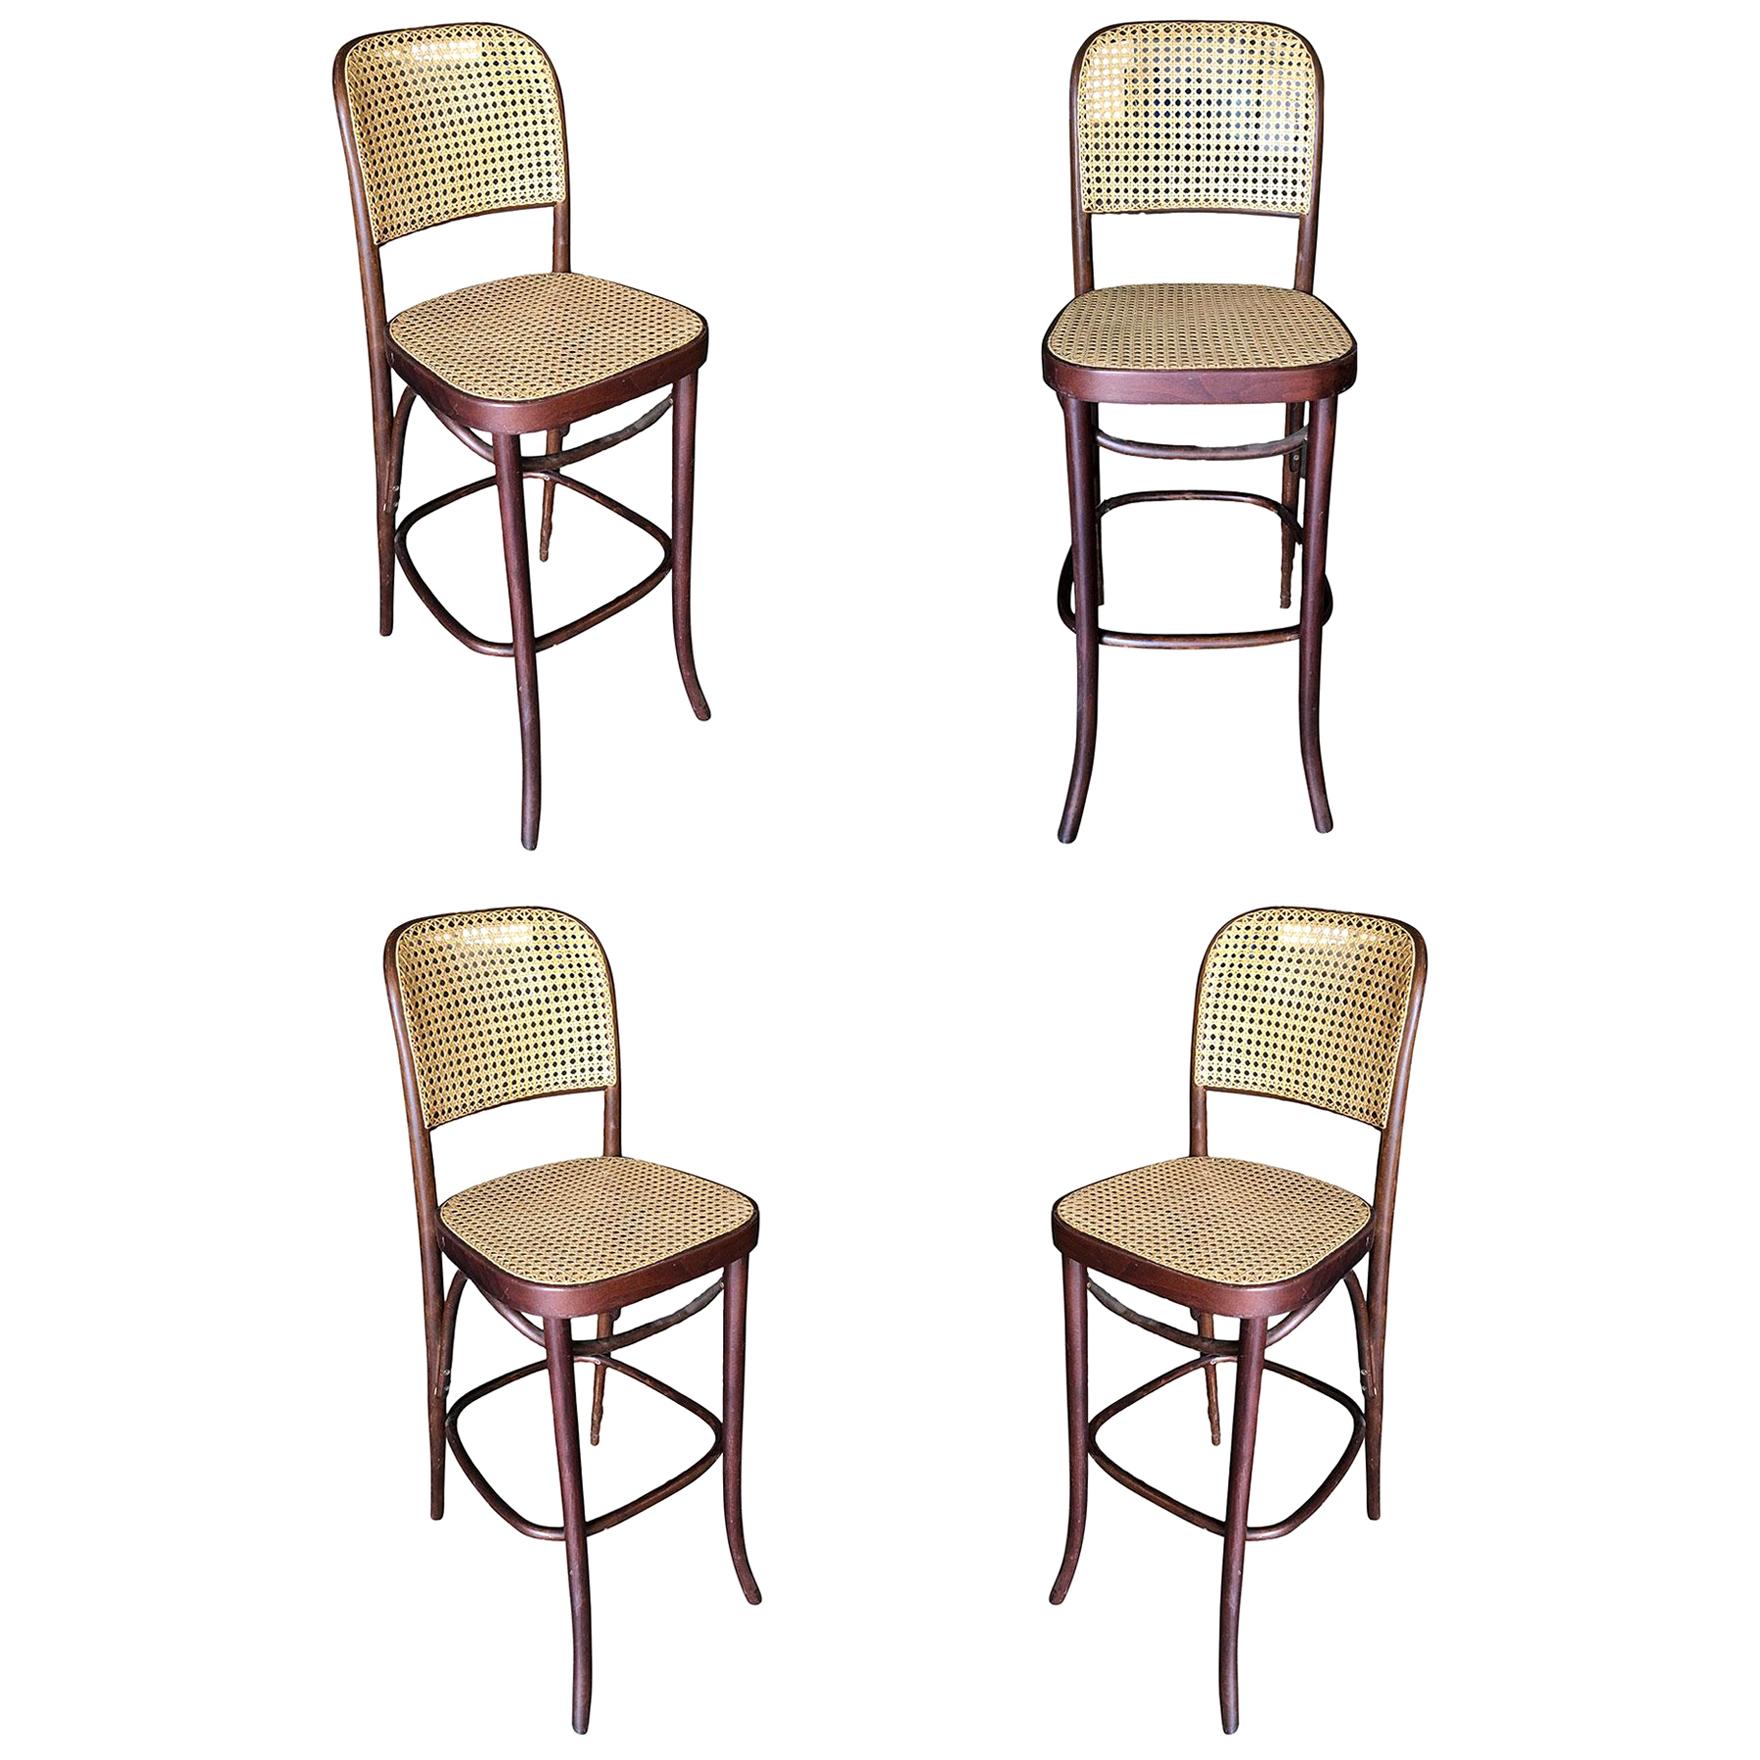 Thonet Number 811 Bentwood Bar Stool w/ Wicker Seat, Set of Four